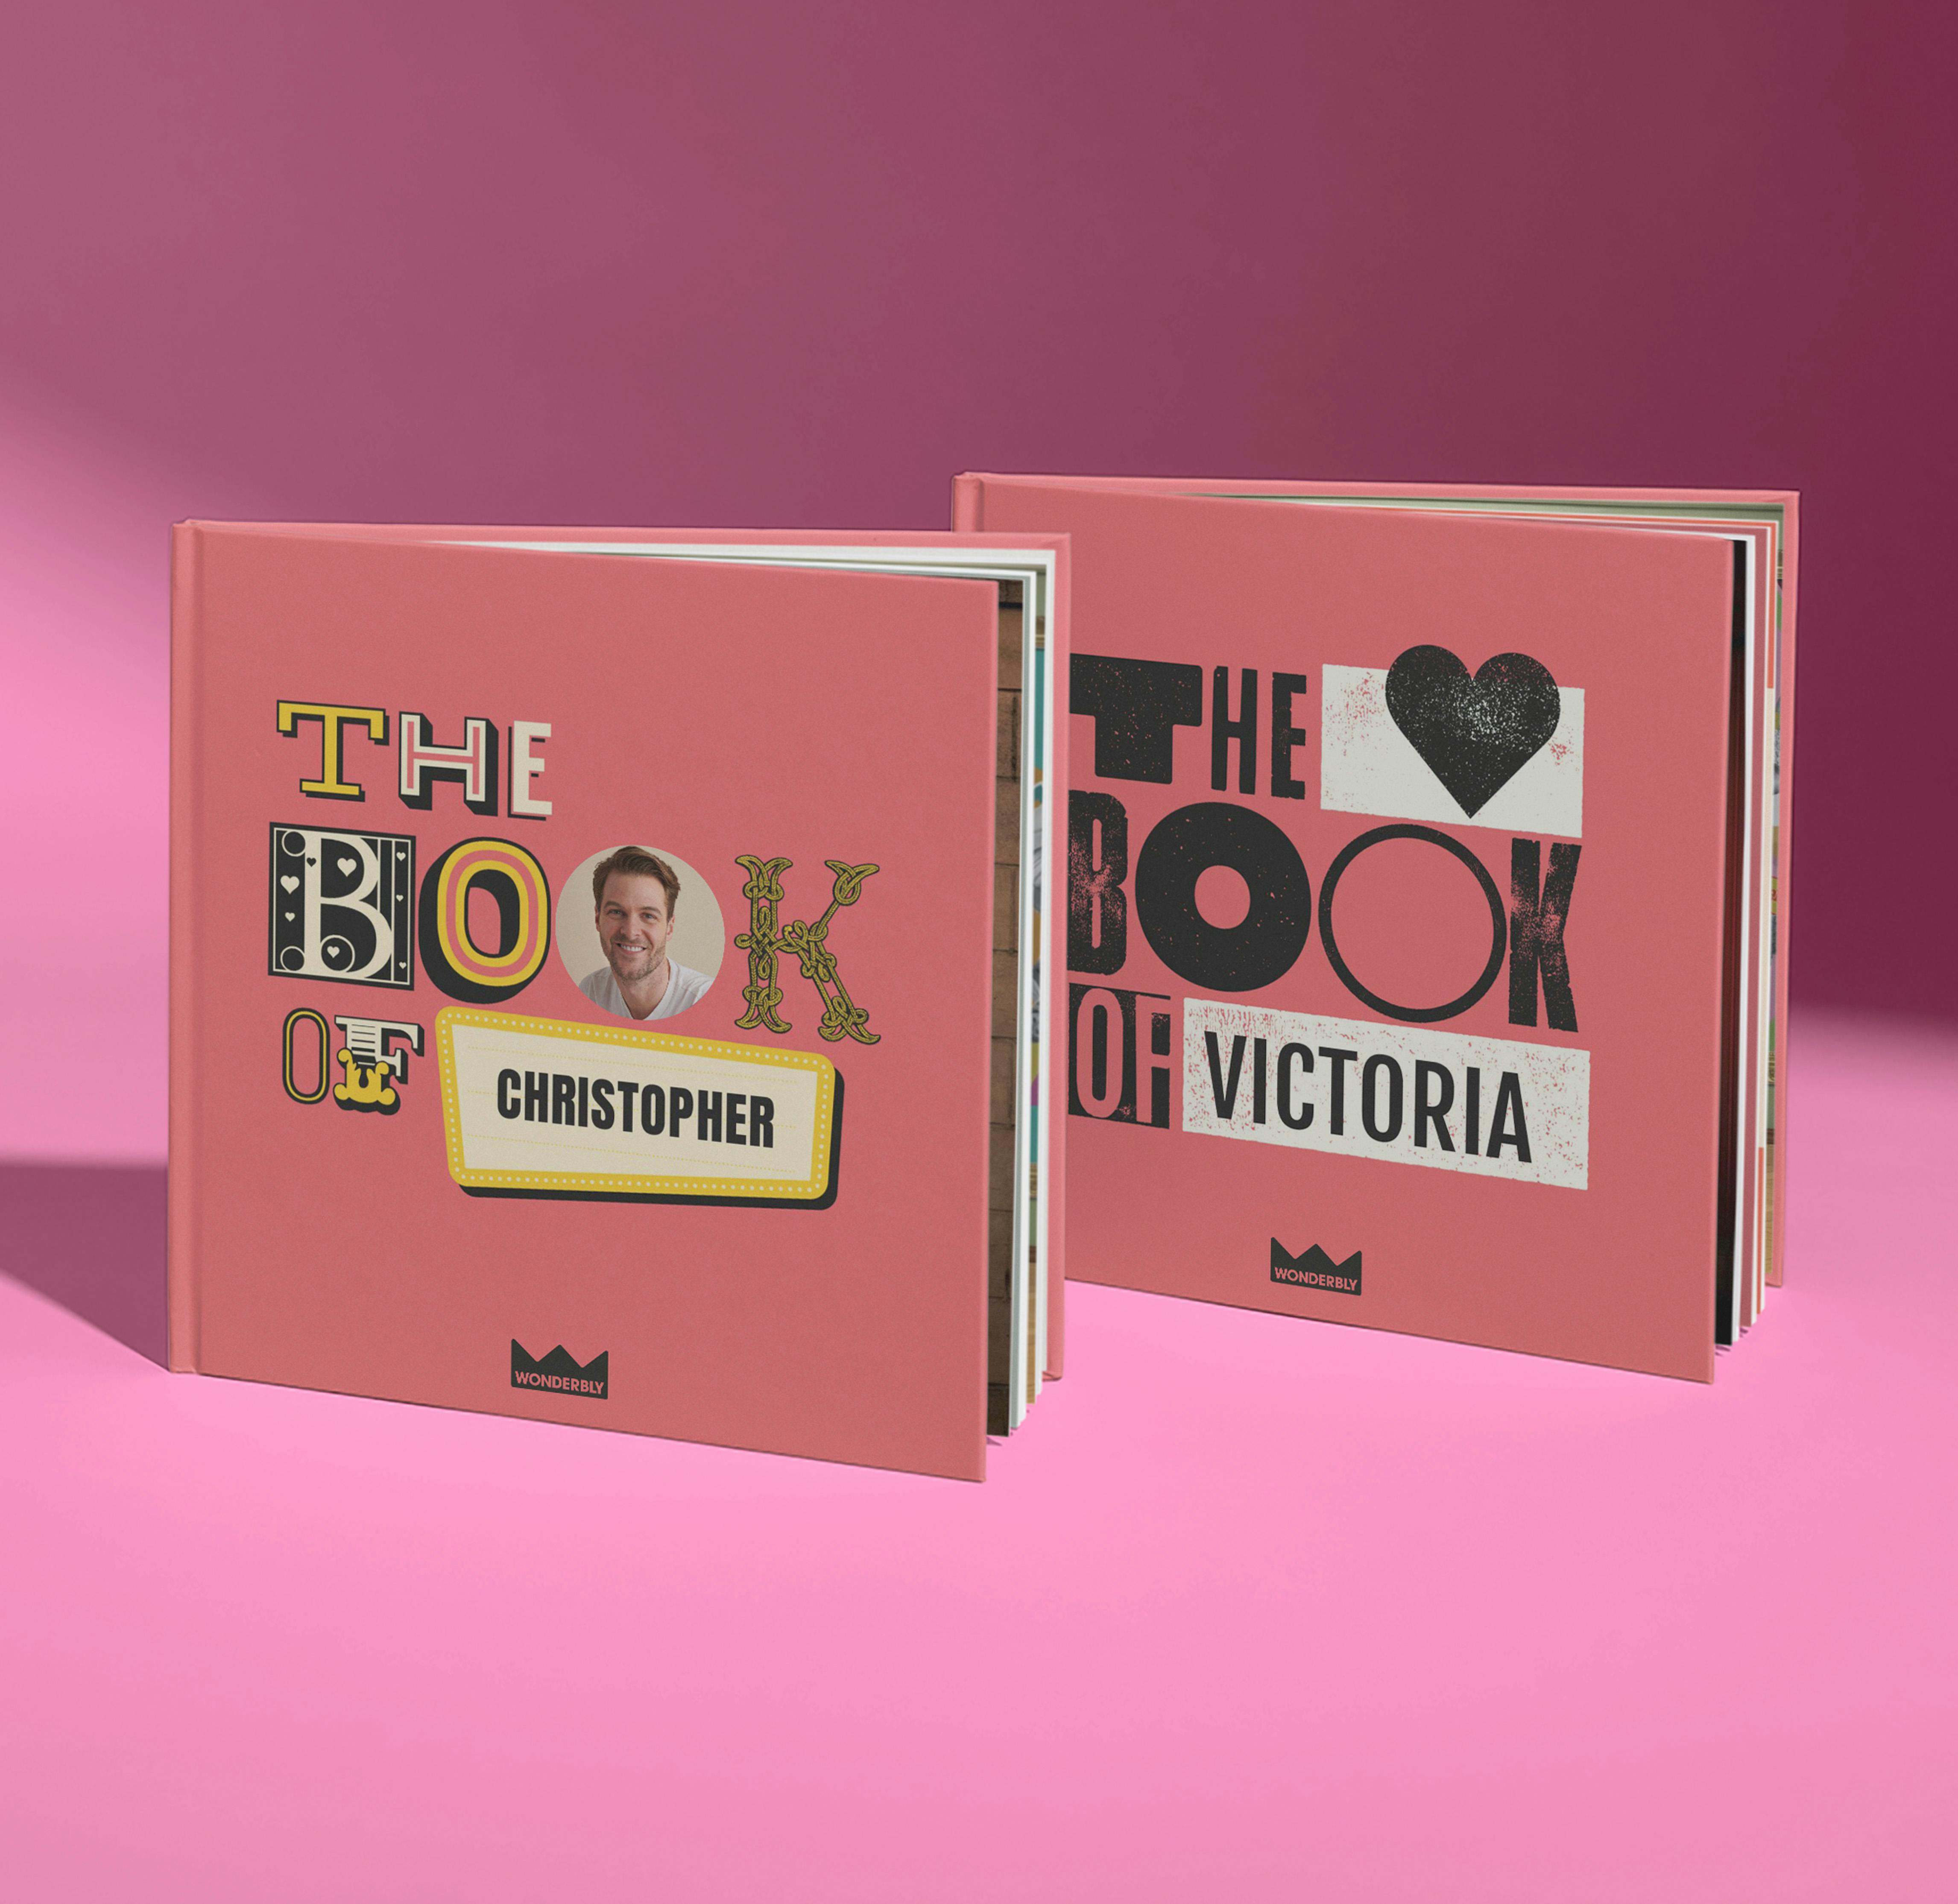 Two examples of personalised book covers